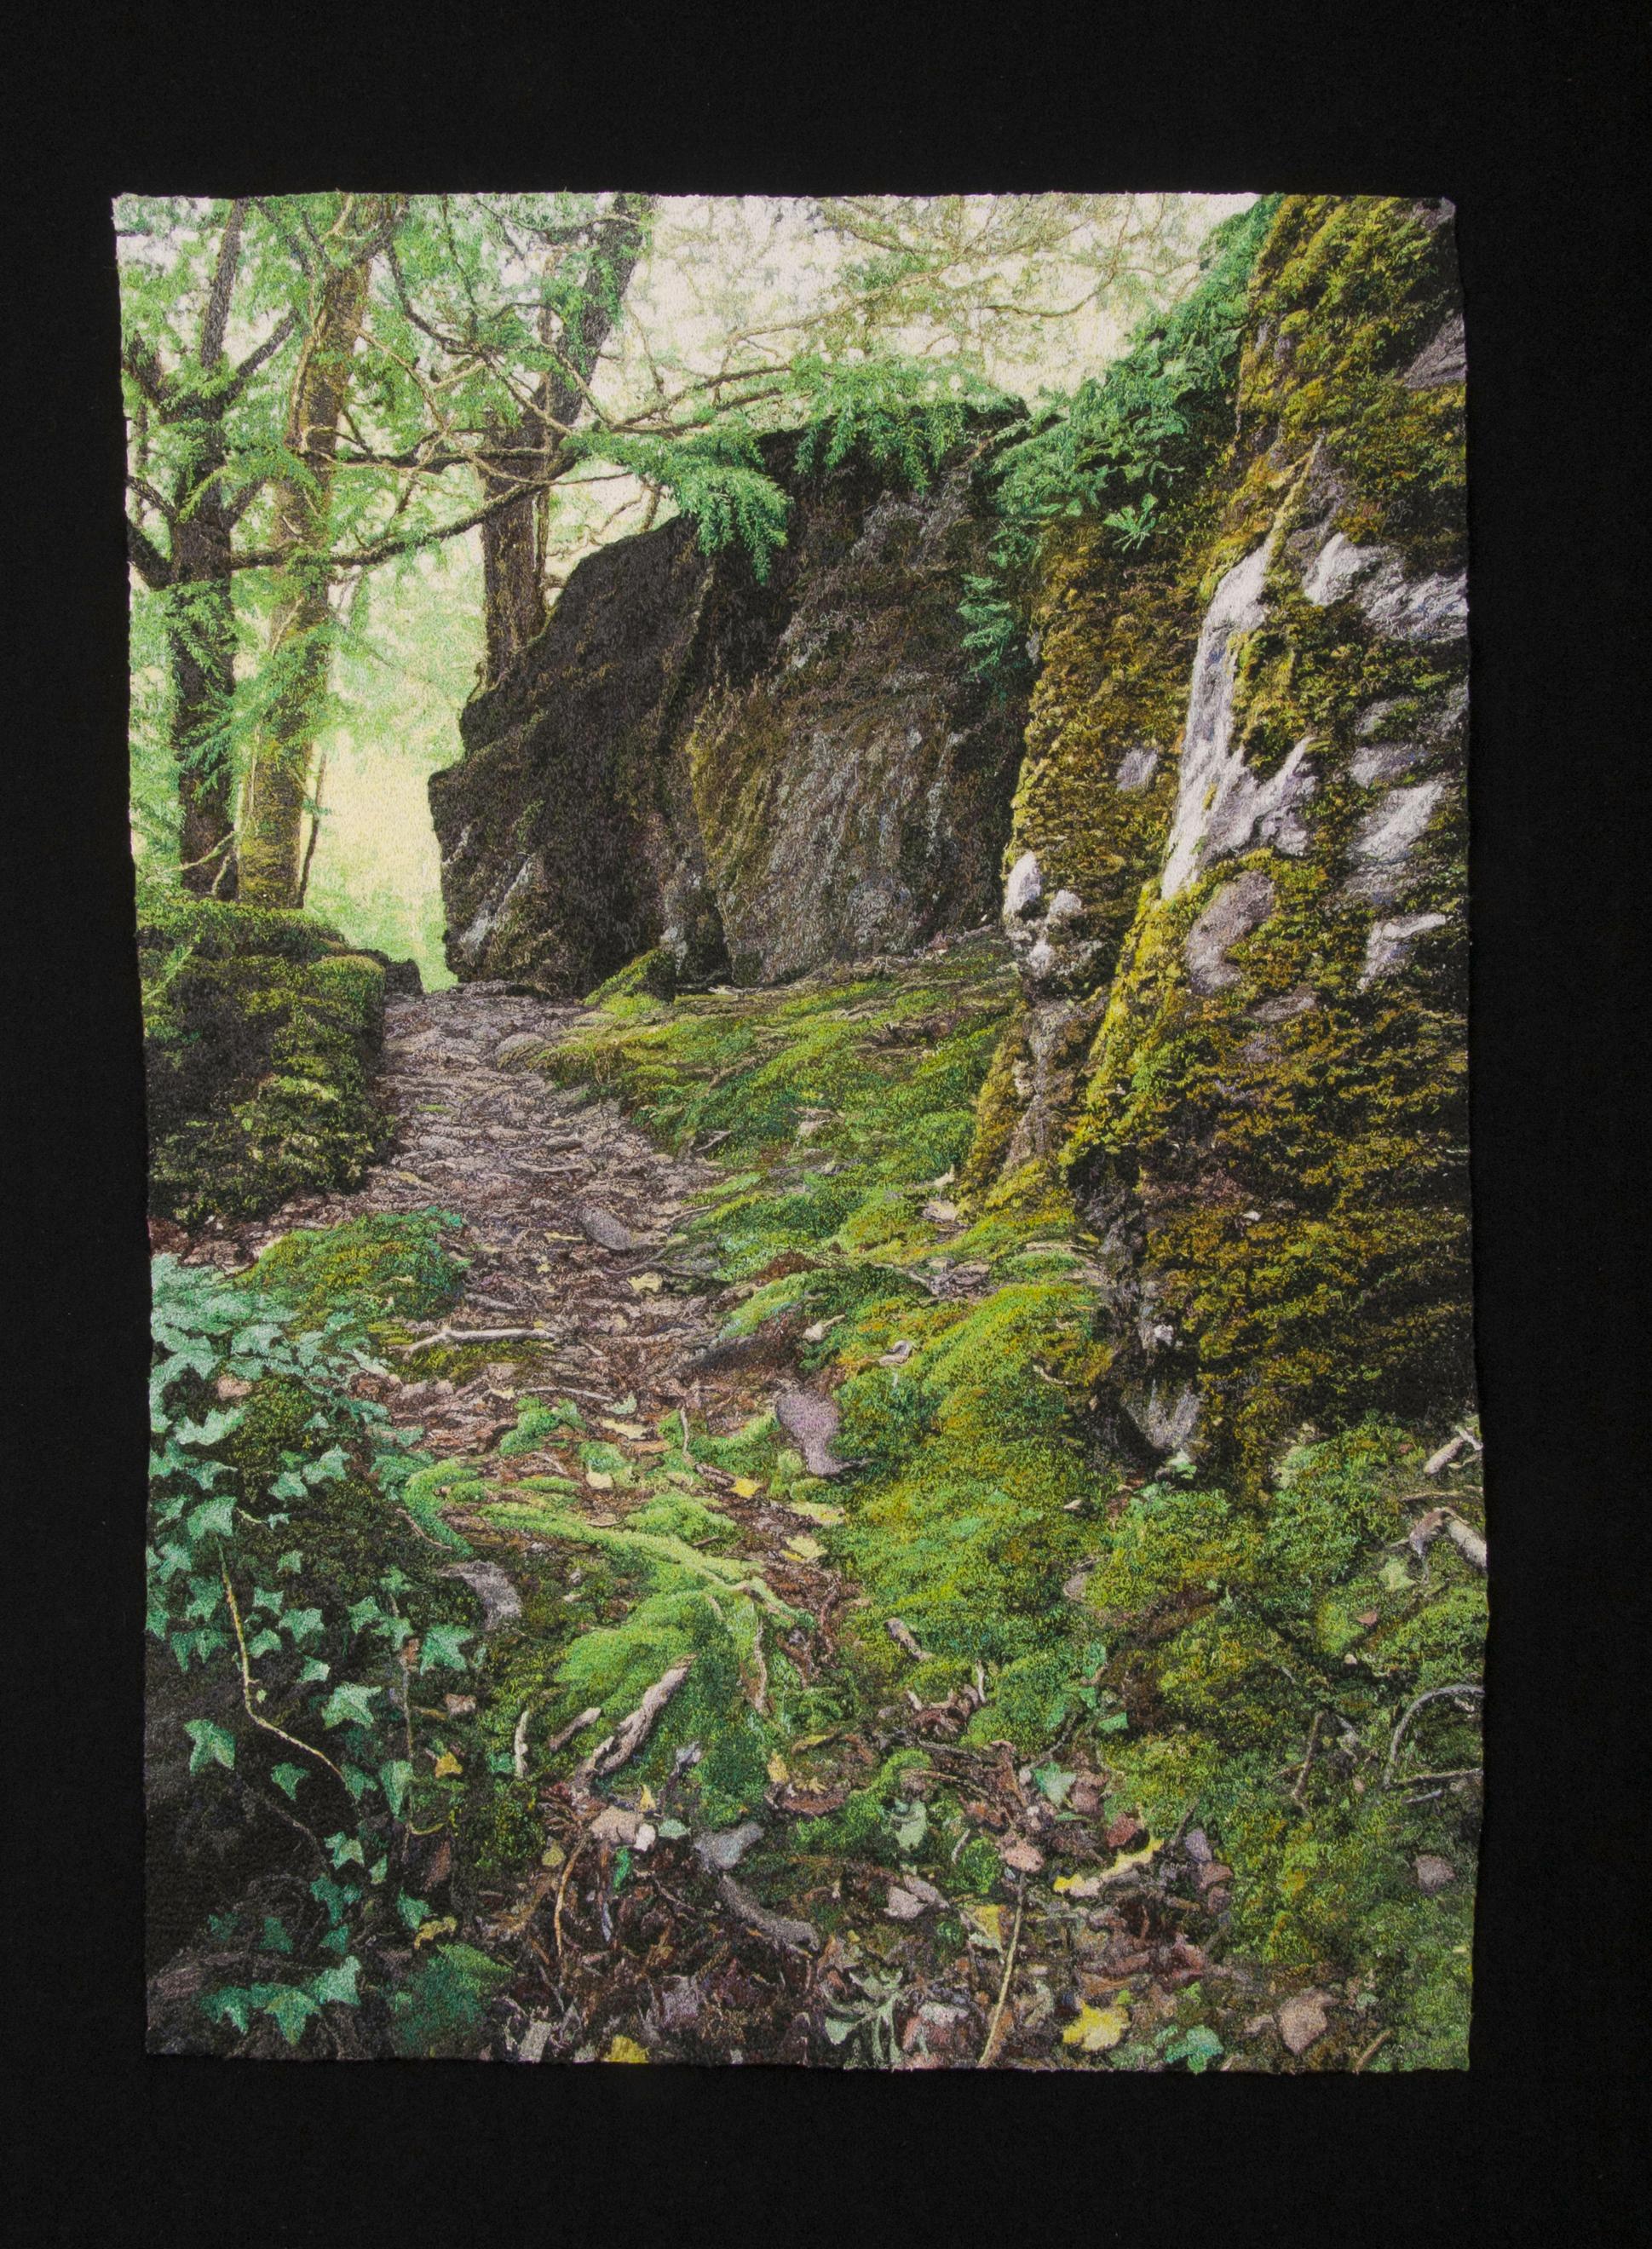 "Mossy Path", Contemporary, Framed, Embroidery, Photorealism, Nature, Landscape - Mixed Media Art by Carol Shinn